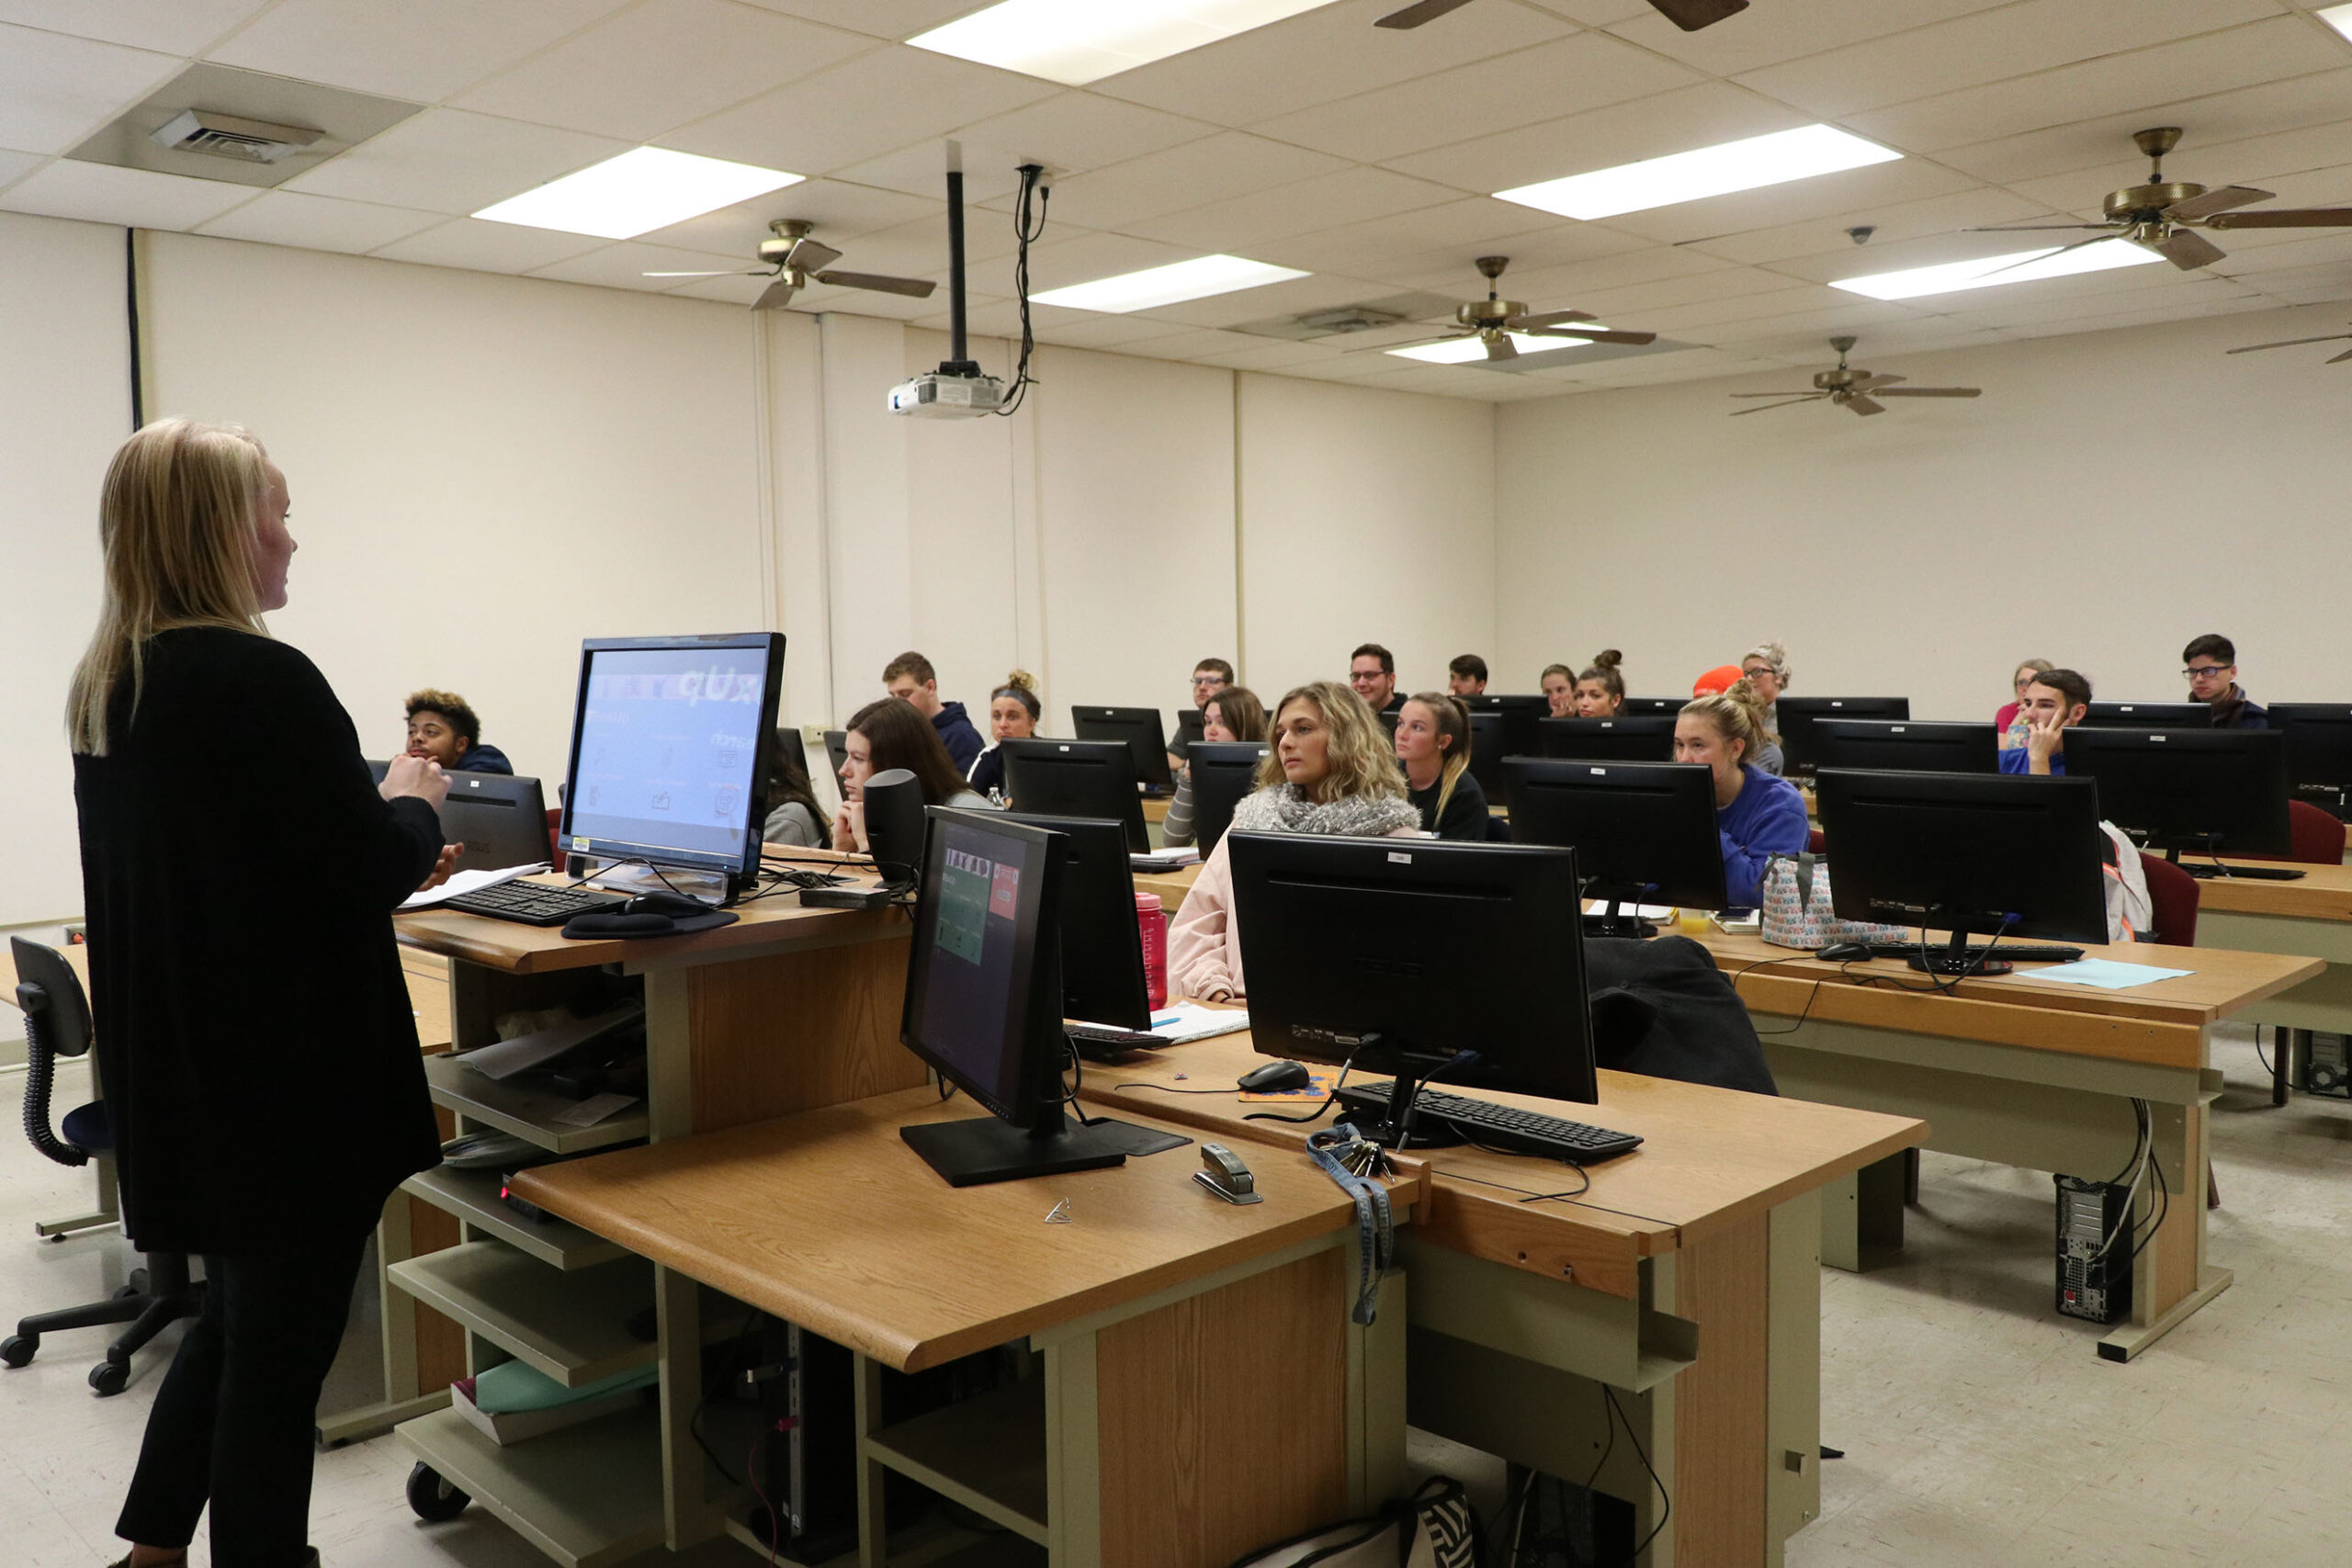 Instructor teaching class of students in computer lab